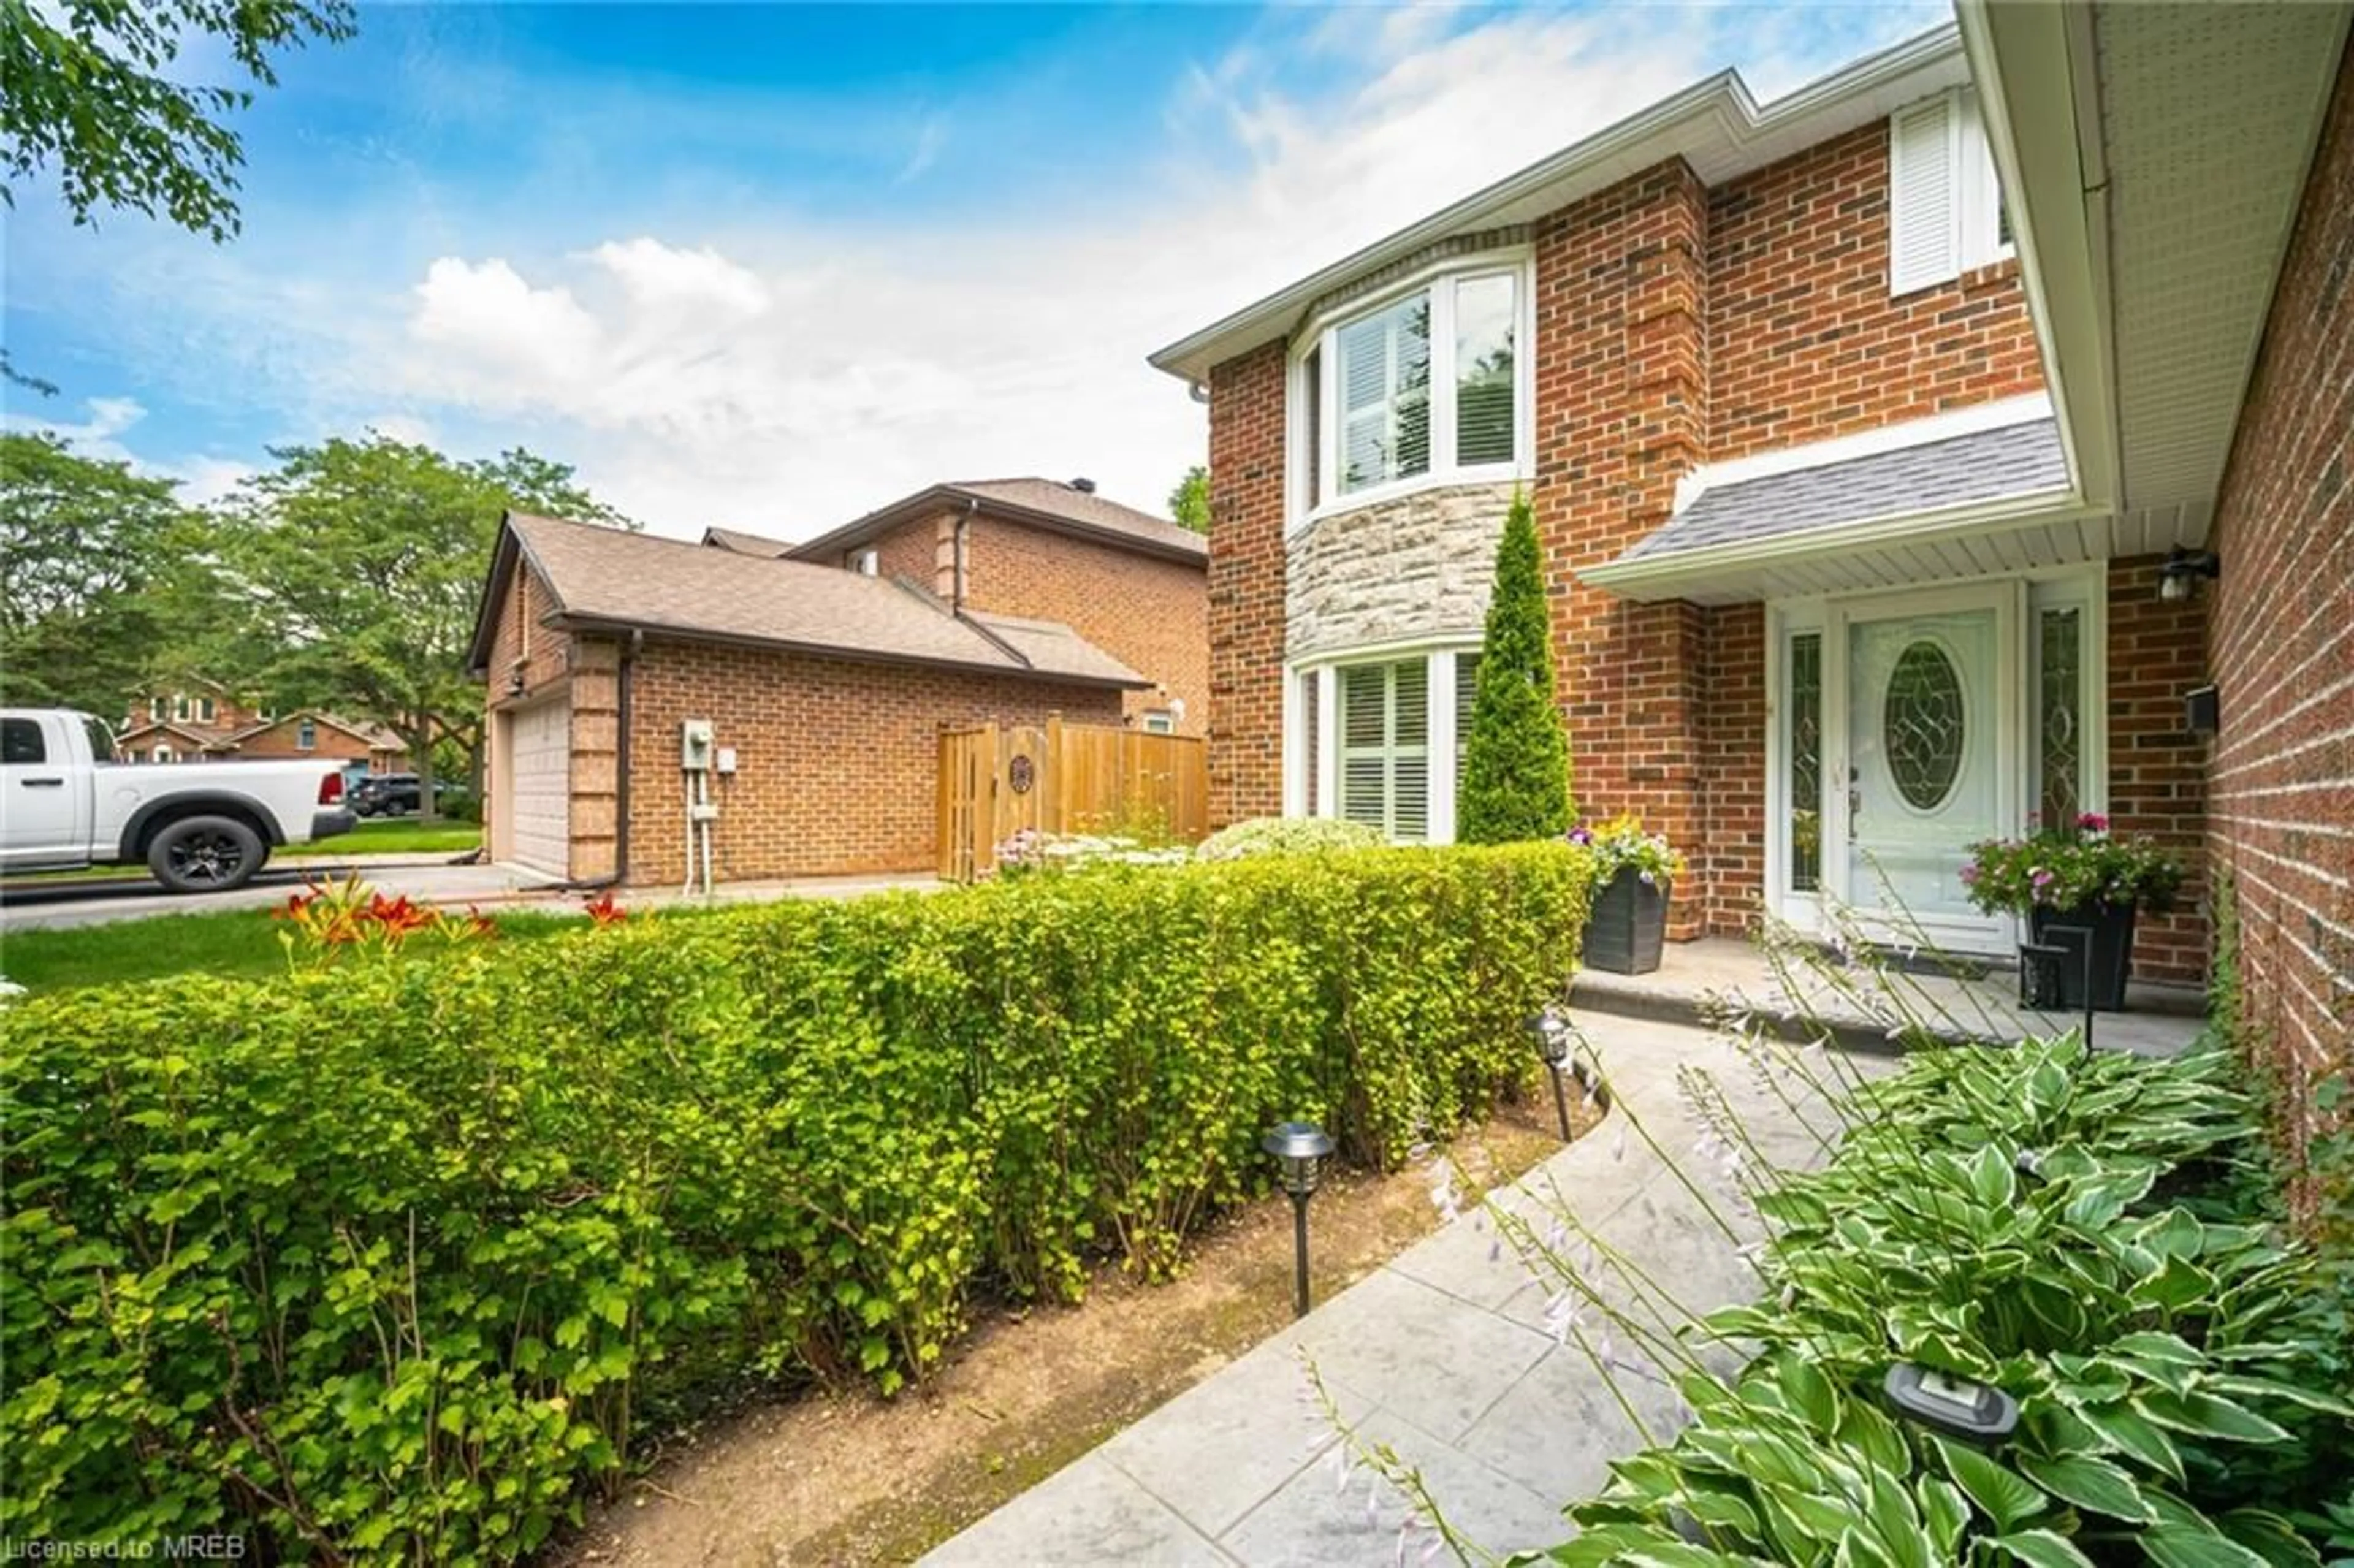 Home with brick exterior material for 22 Archer Crt, Brampton Ontario L6Z 3J3